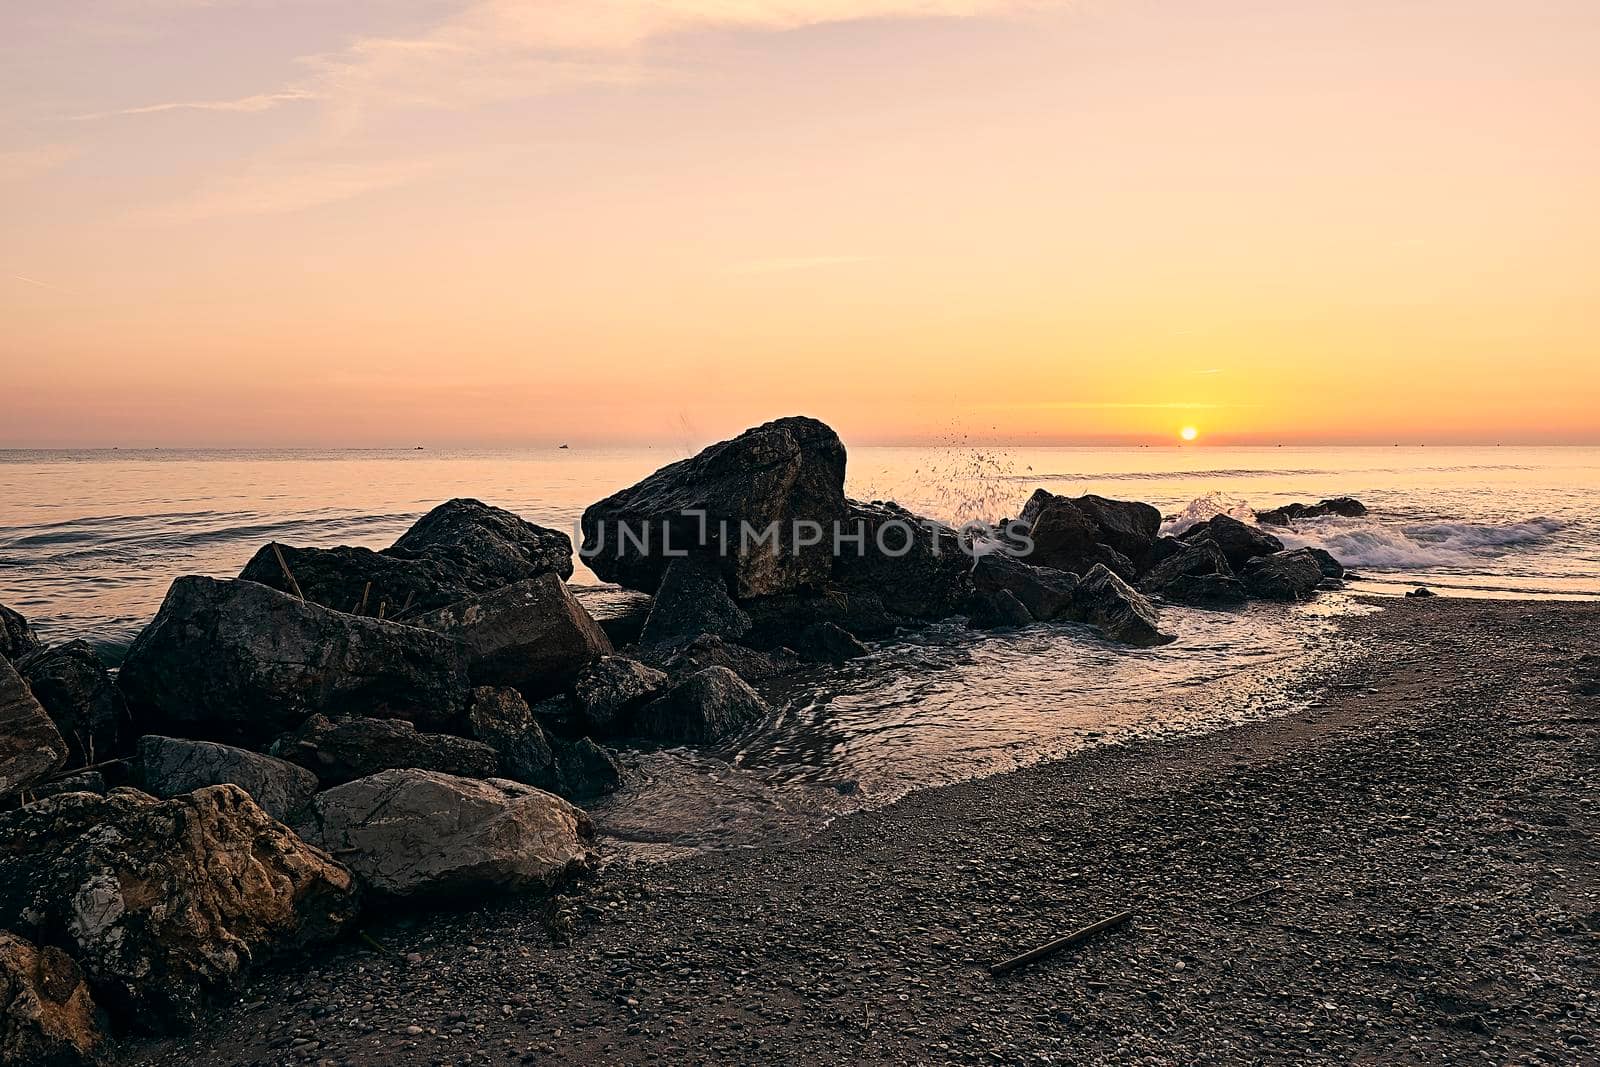 Sunrise on the beach in front of some rocks by raul_ruiz